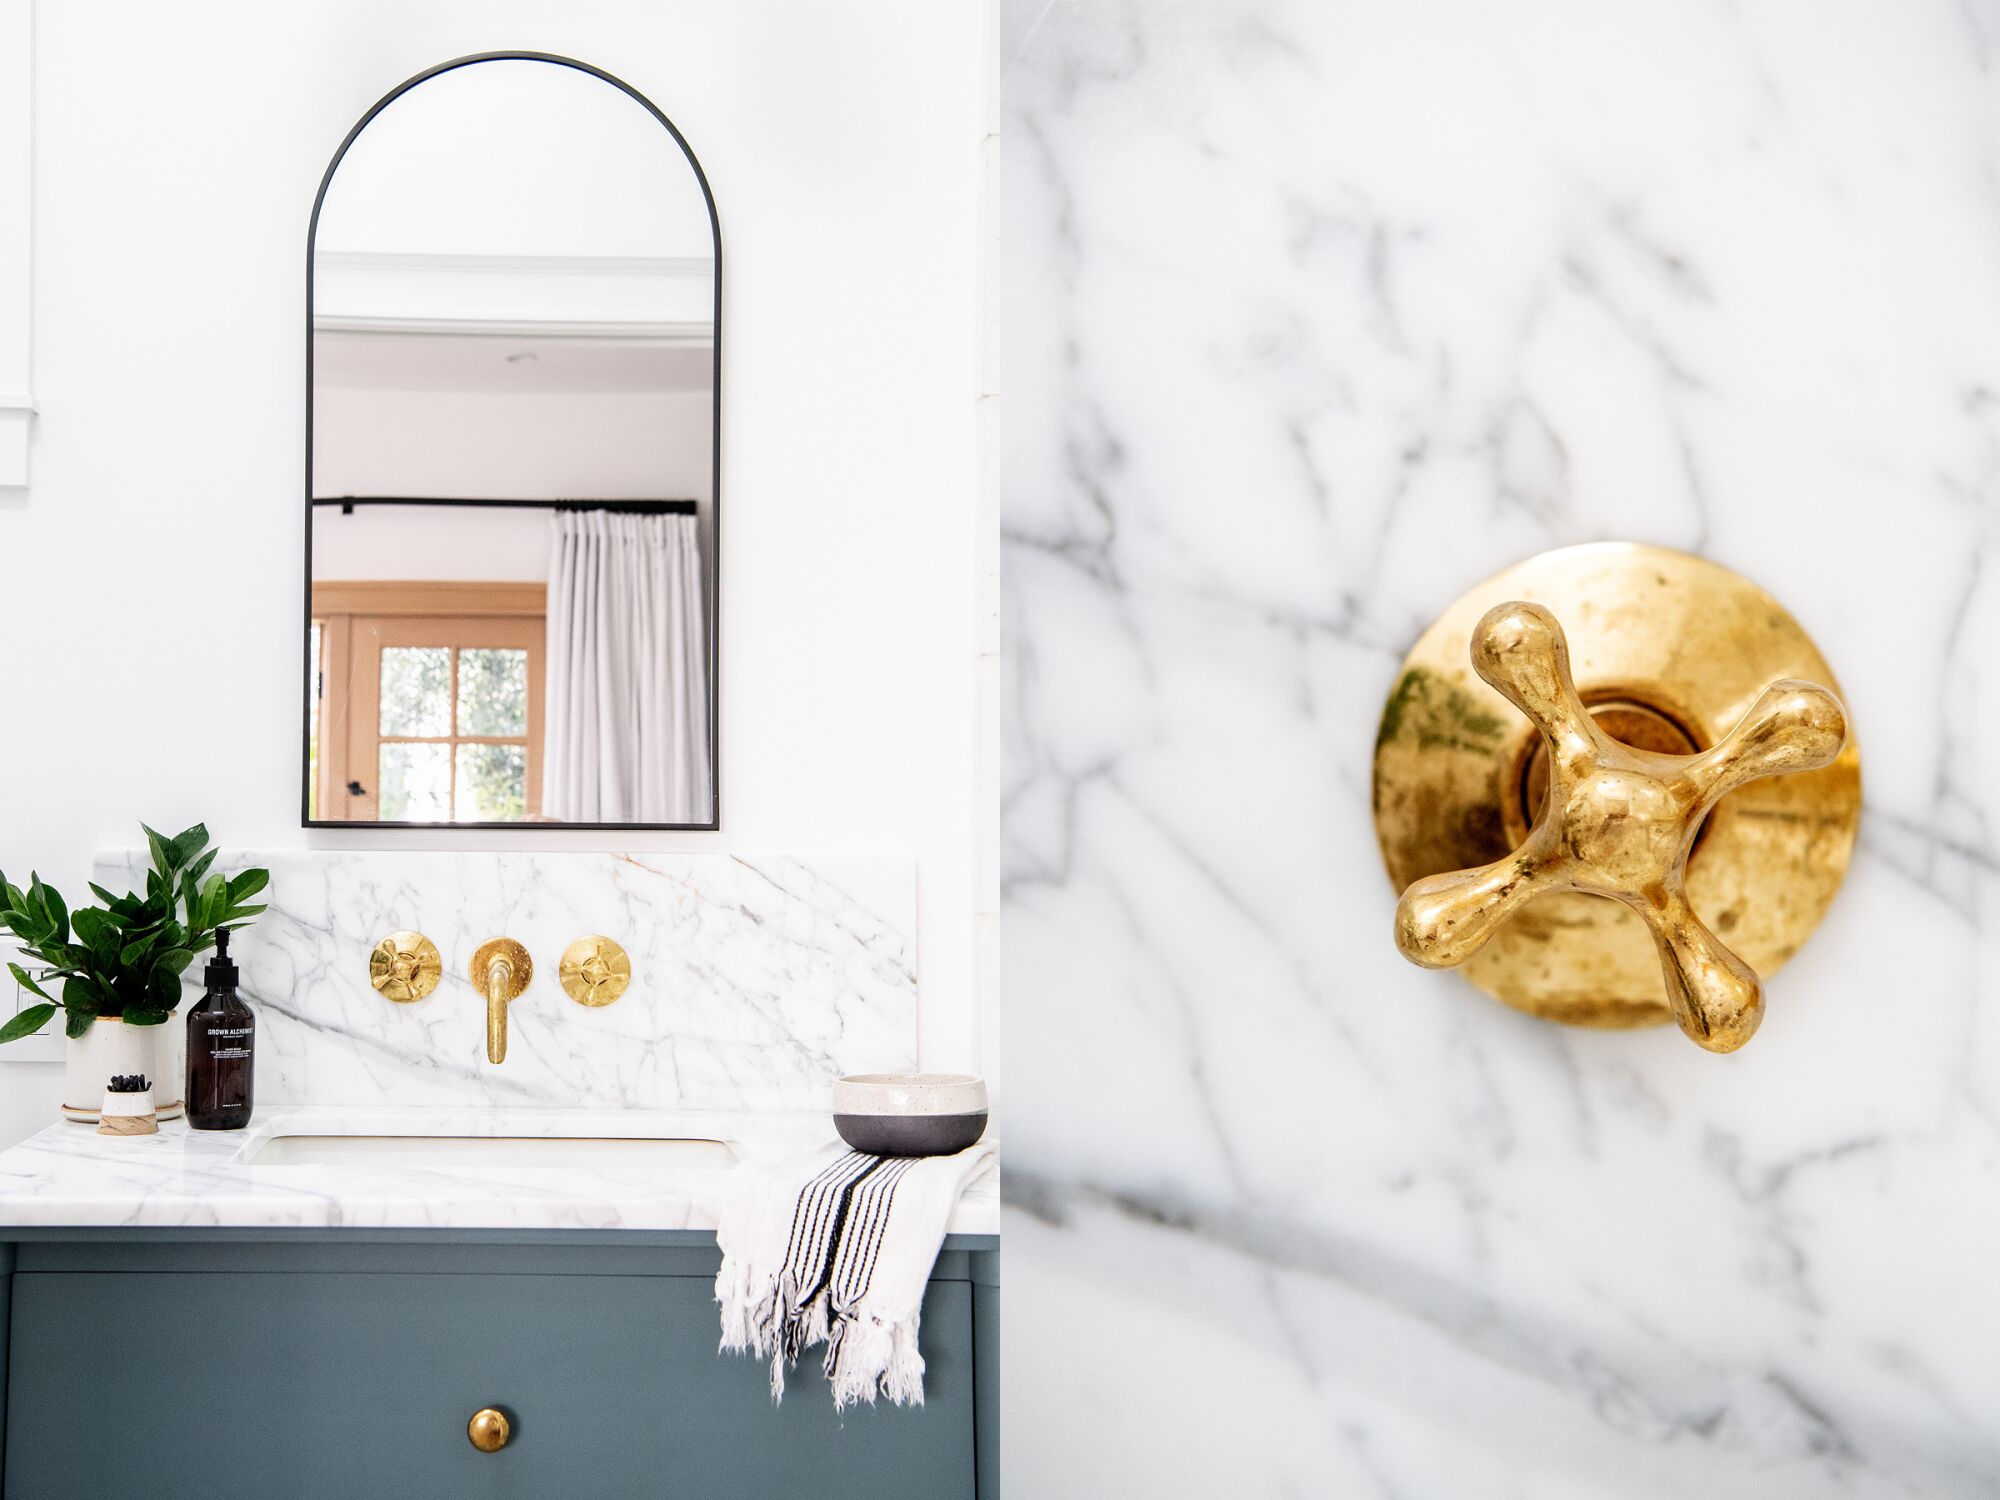 Two pictures side by side of a bathroom sink, left, and a water faucet knob against a marble backsplash, right.